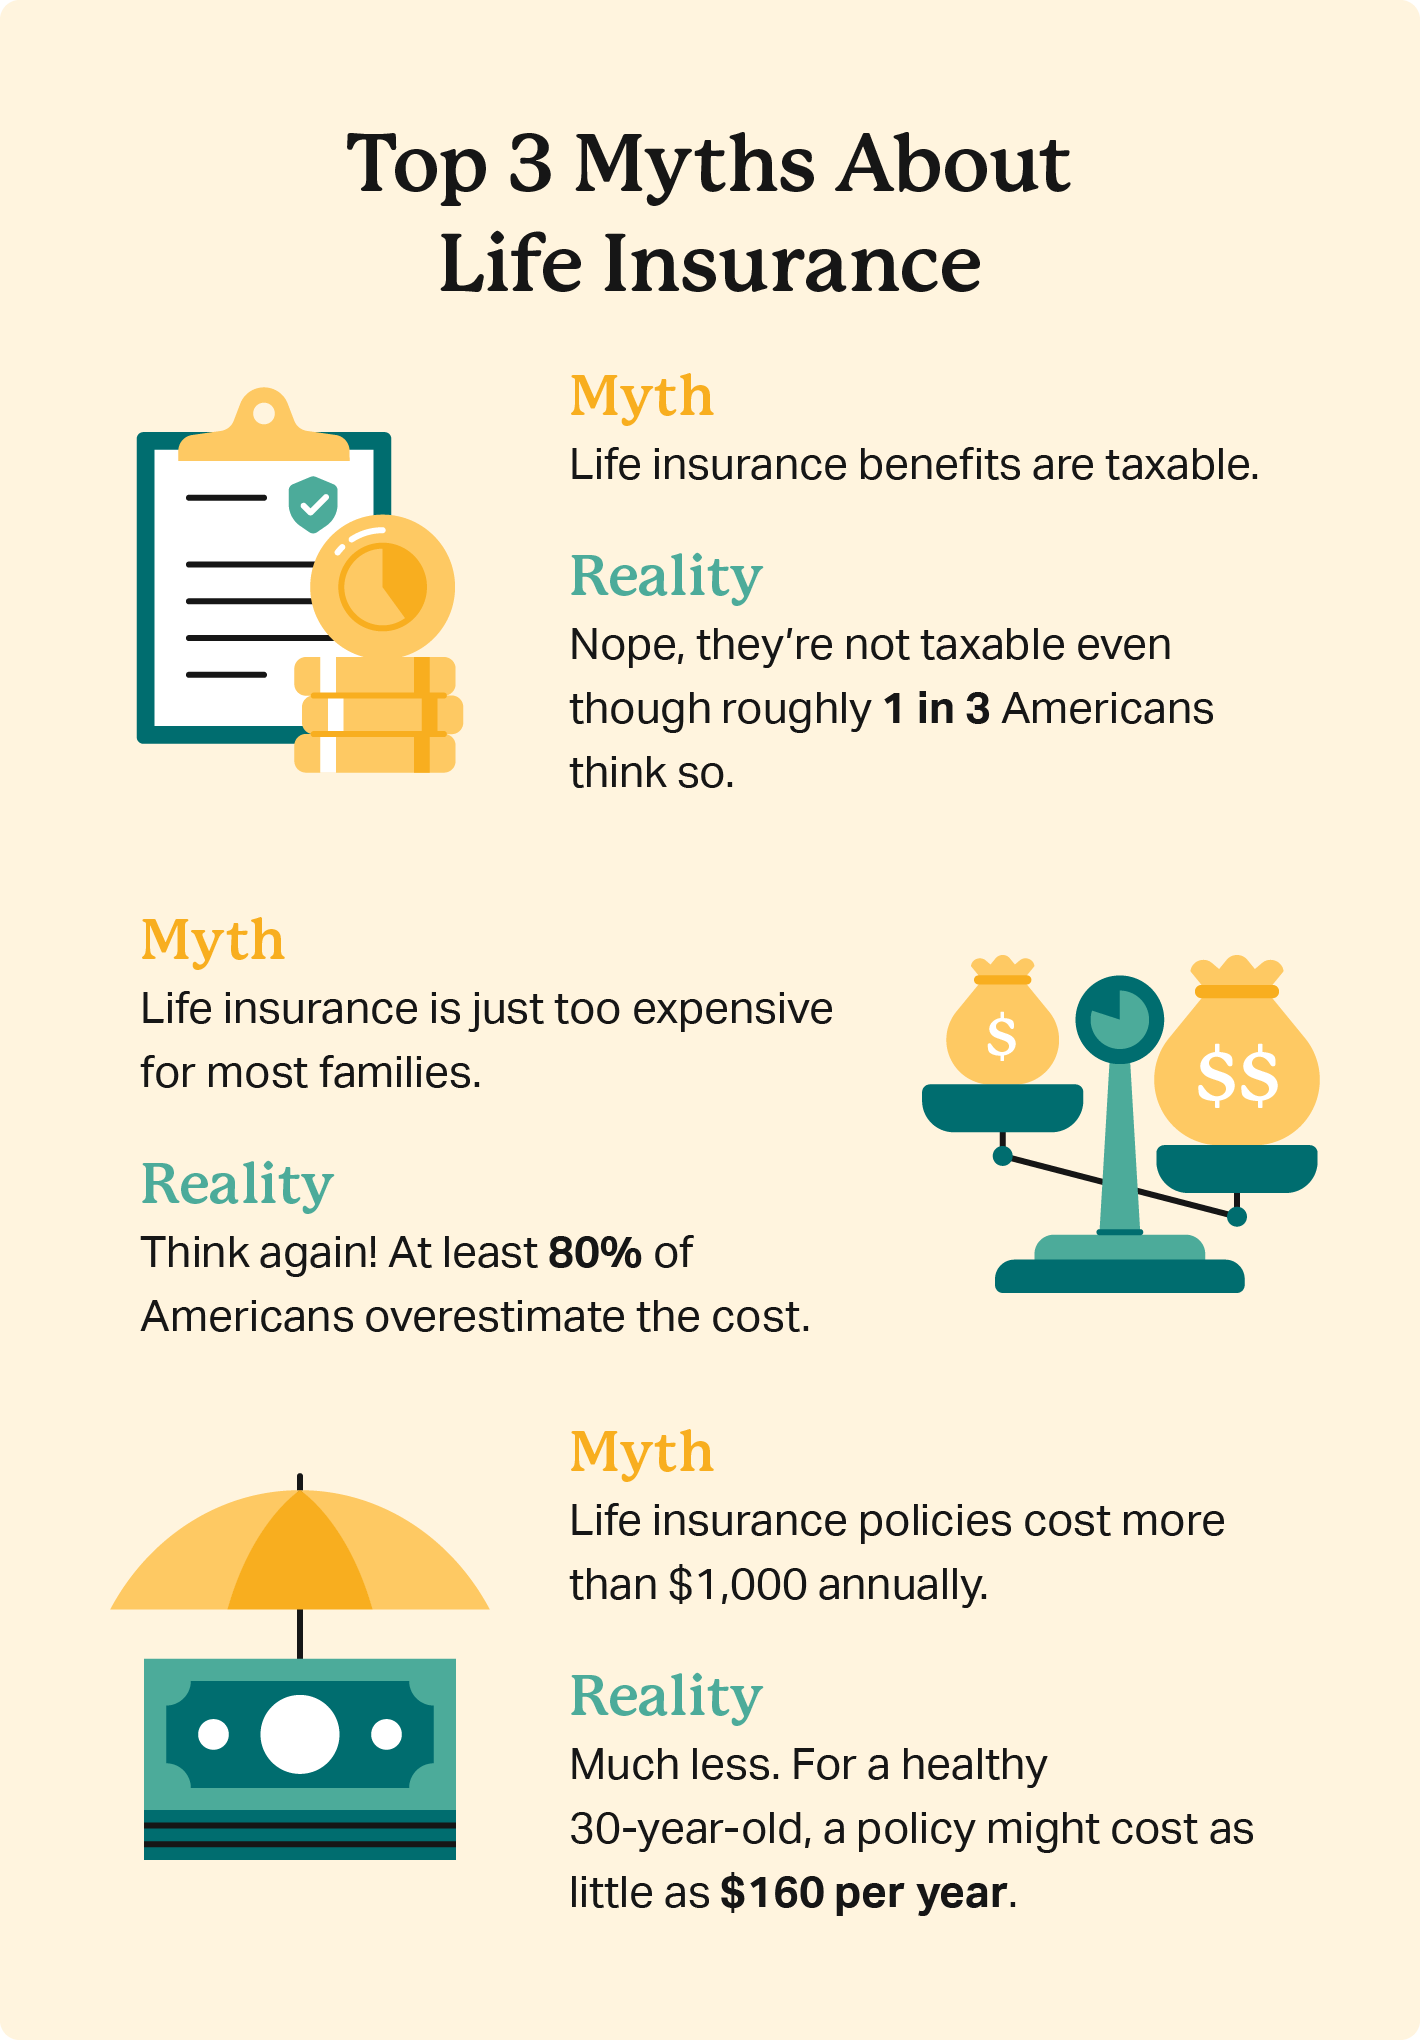 An infographic breaks common life insurance myths, including that life insurance is too expensive or that they exceed $1,000 annually.